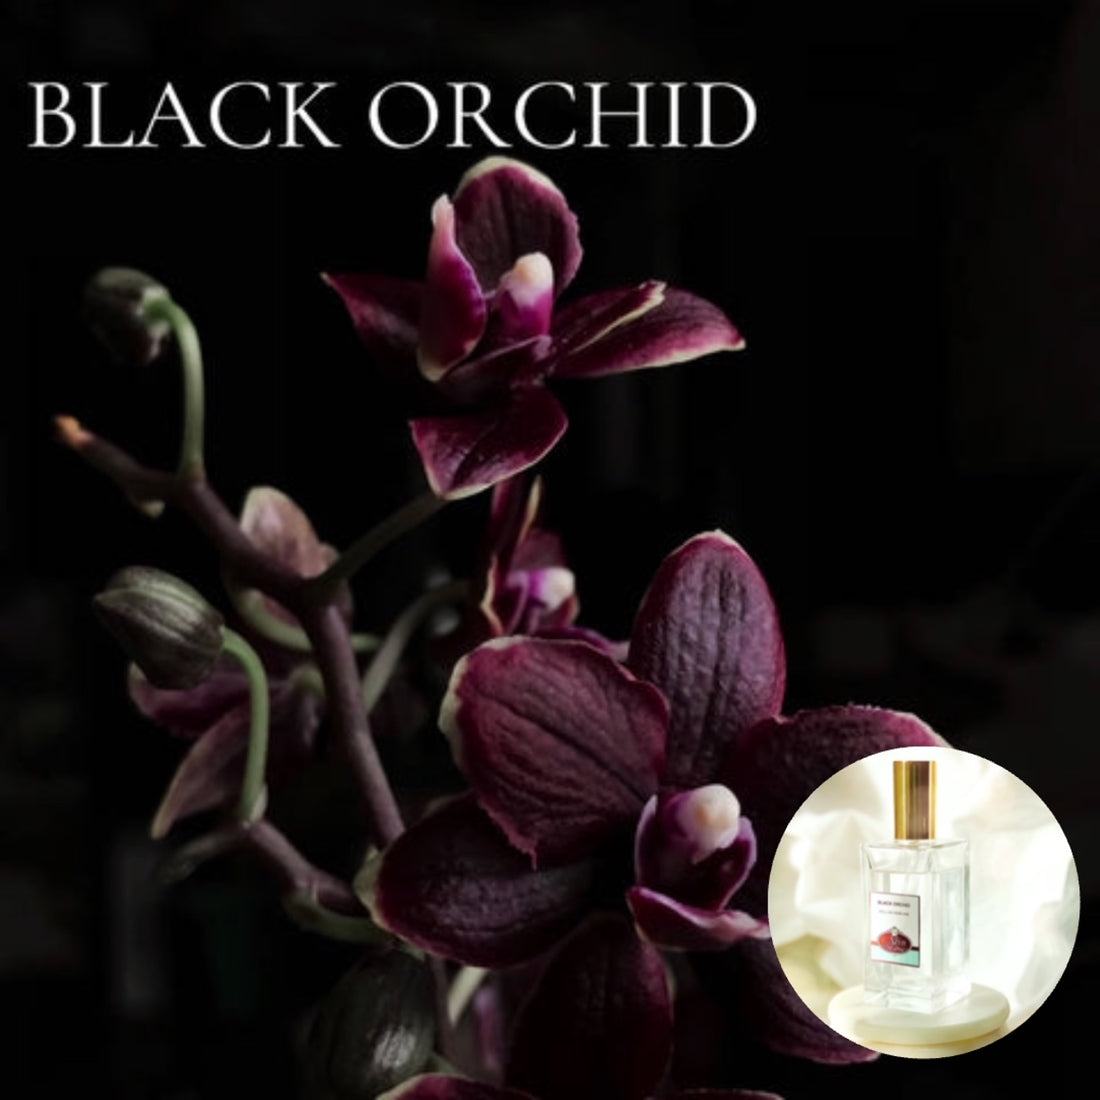 BLACK ORCHID - Room and Body Spray, Buy 2 get 1  FREE